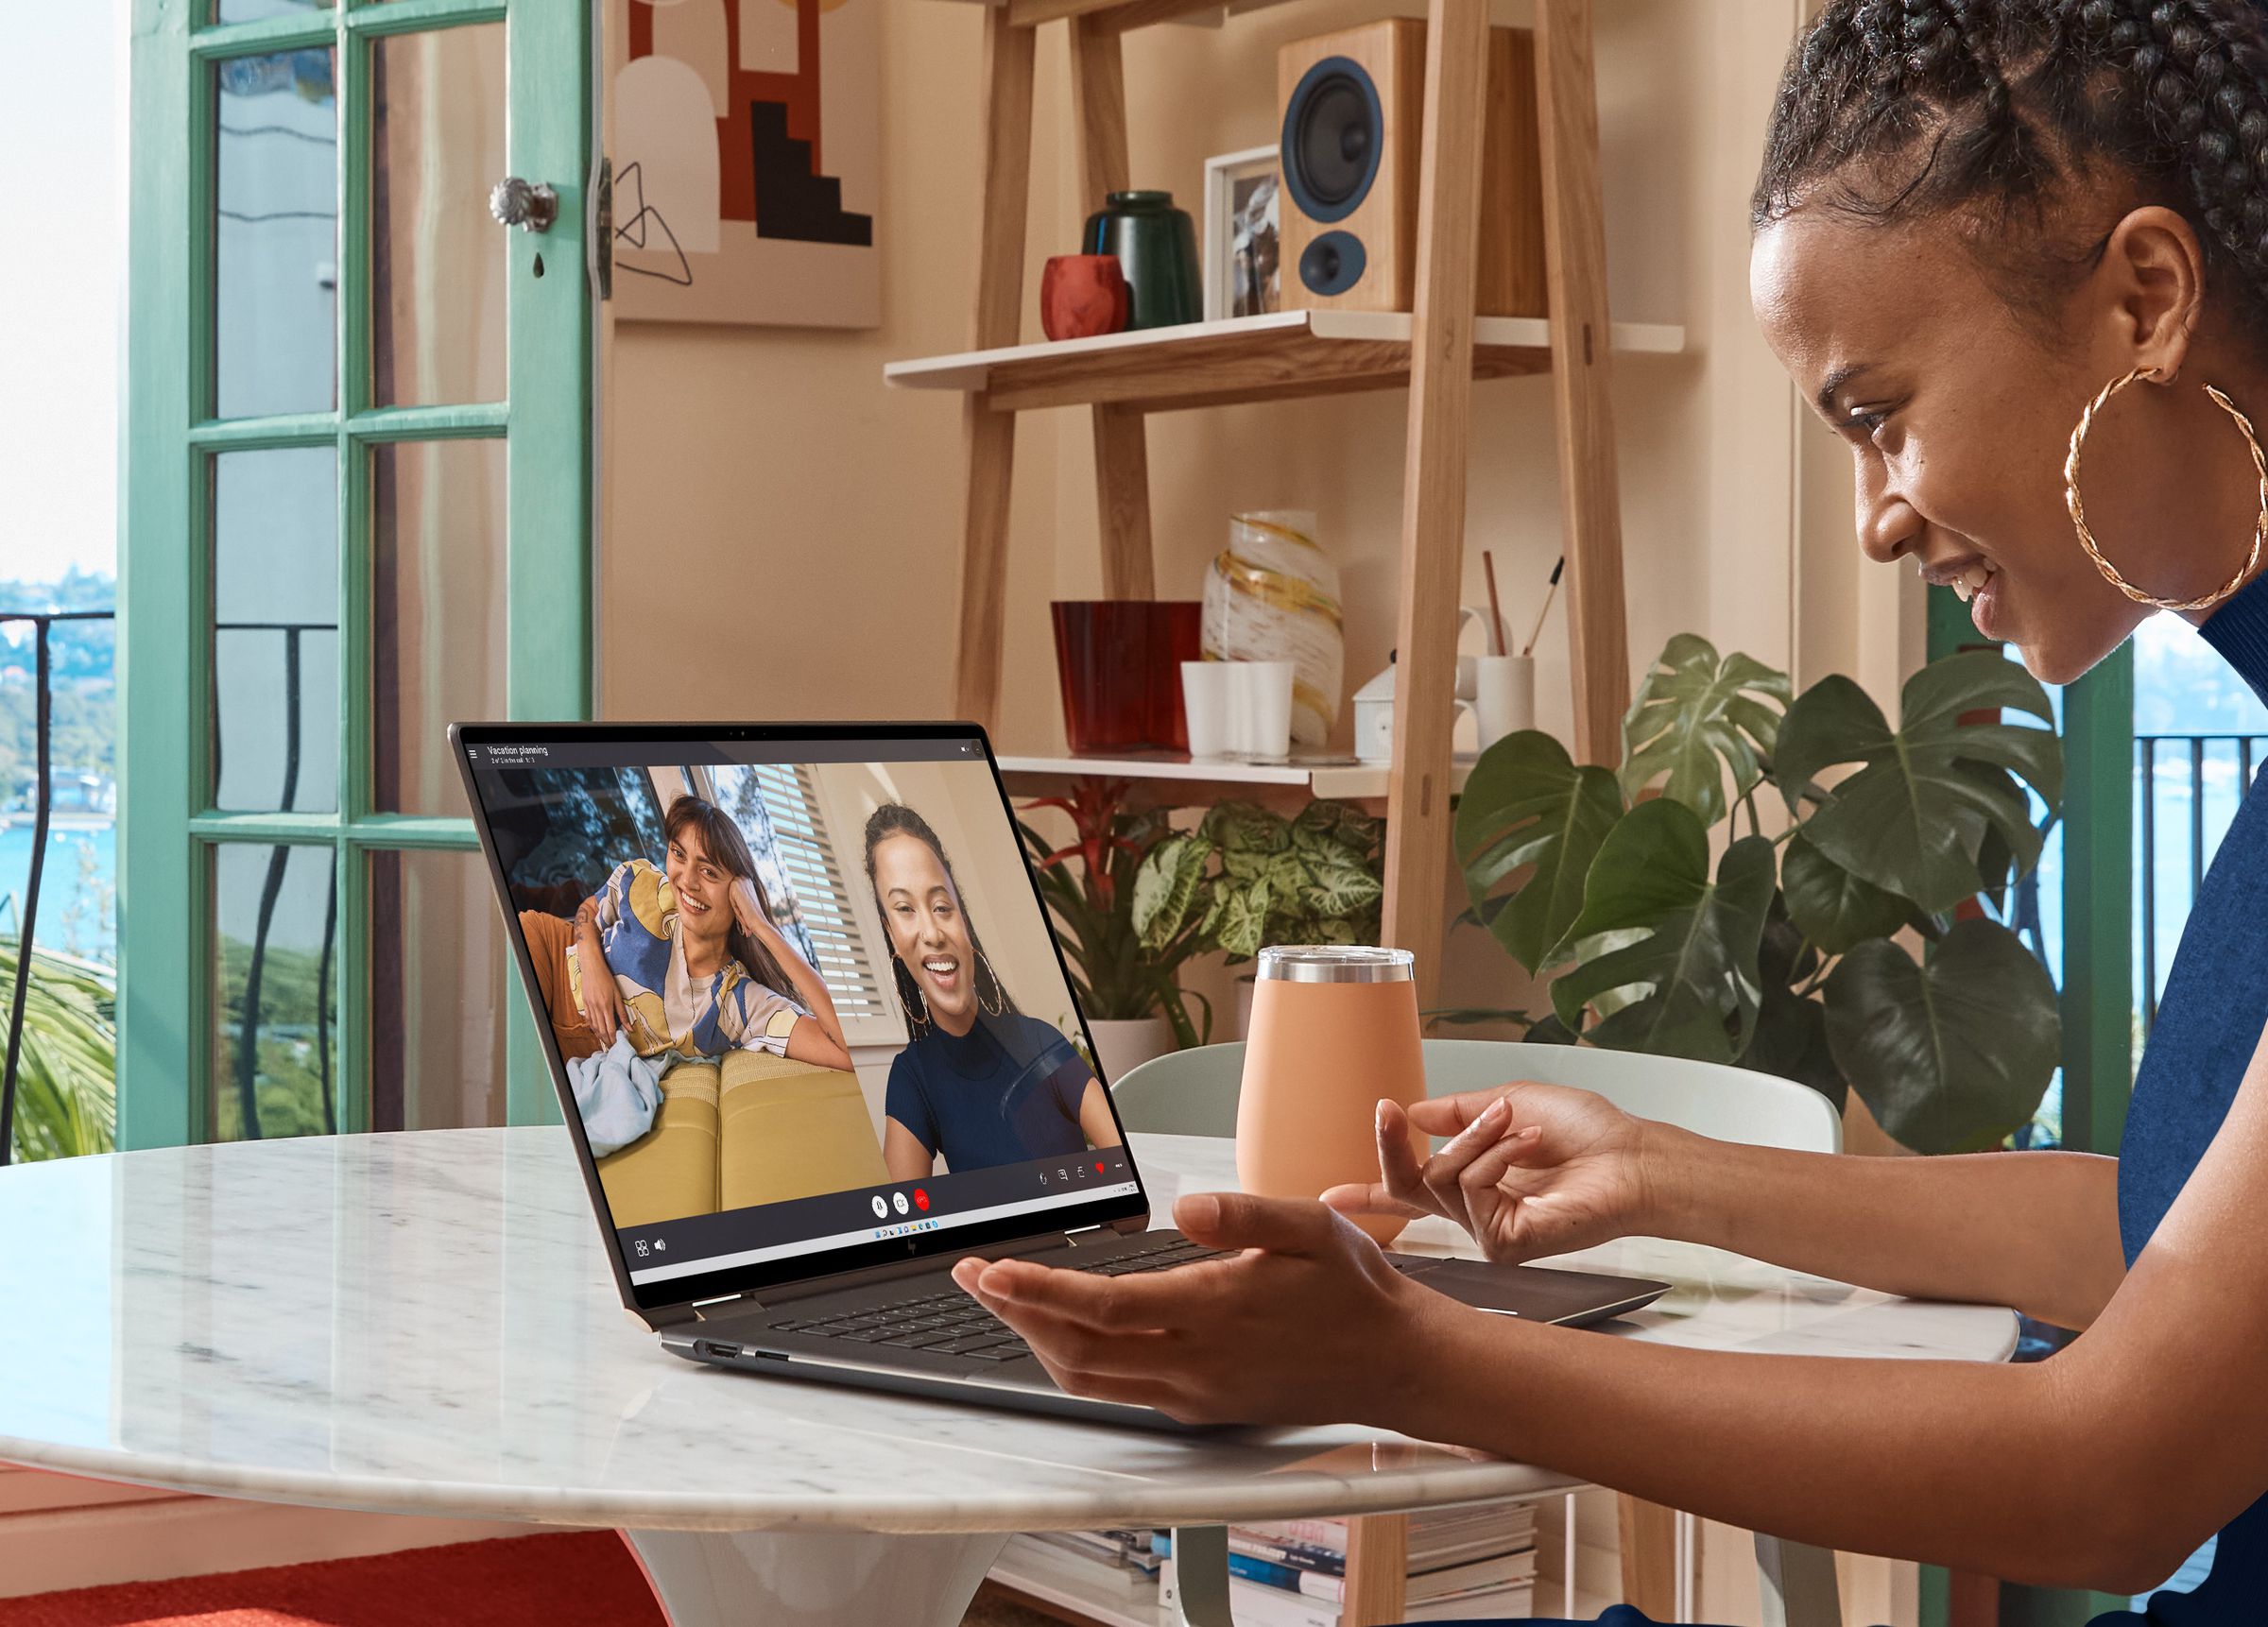 A user participates in a video call on the HP Spectre x360 16. The laptop is seen from the side and sits on a marble table. A hydroflask is to its right, as is a shelf populated with two potted plants, a stack of books, a number of glass cups and jars, a pencil pot, and a speaker.